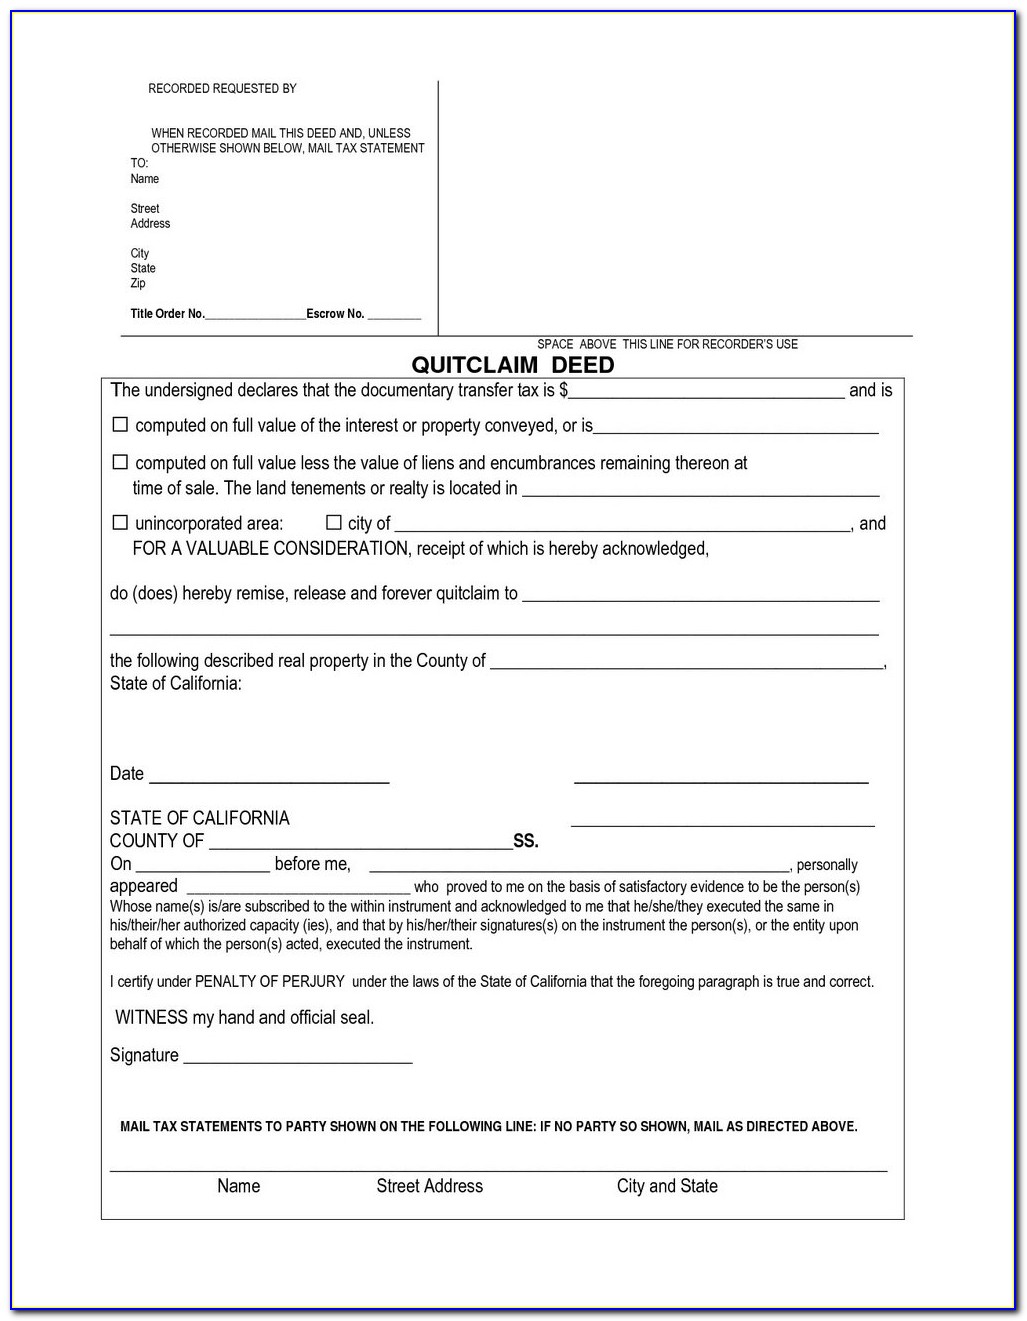 California Quit Claim Deed Form Instructions